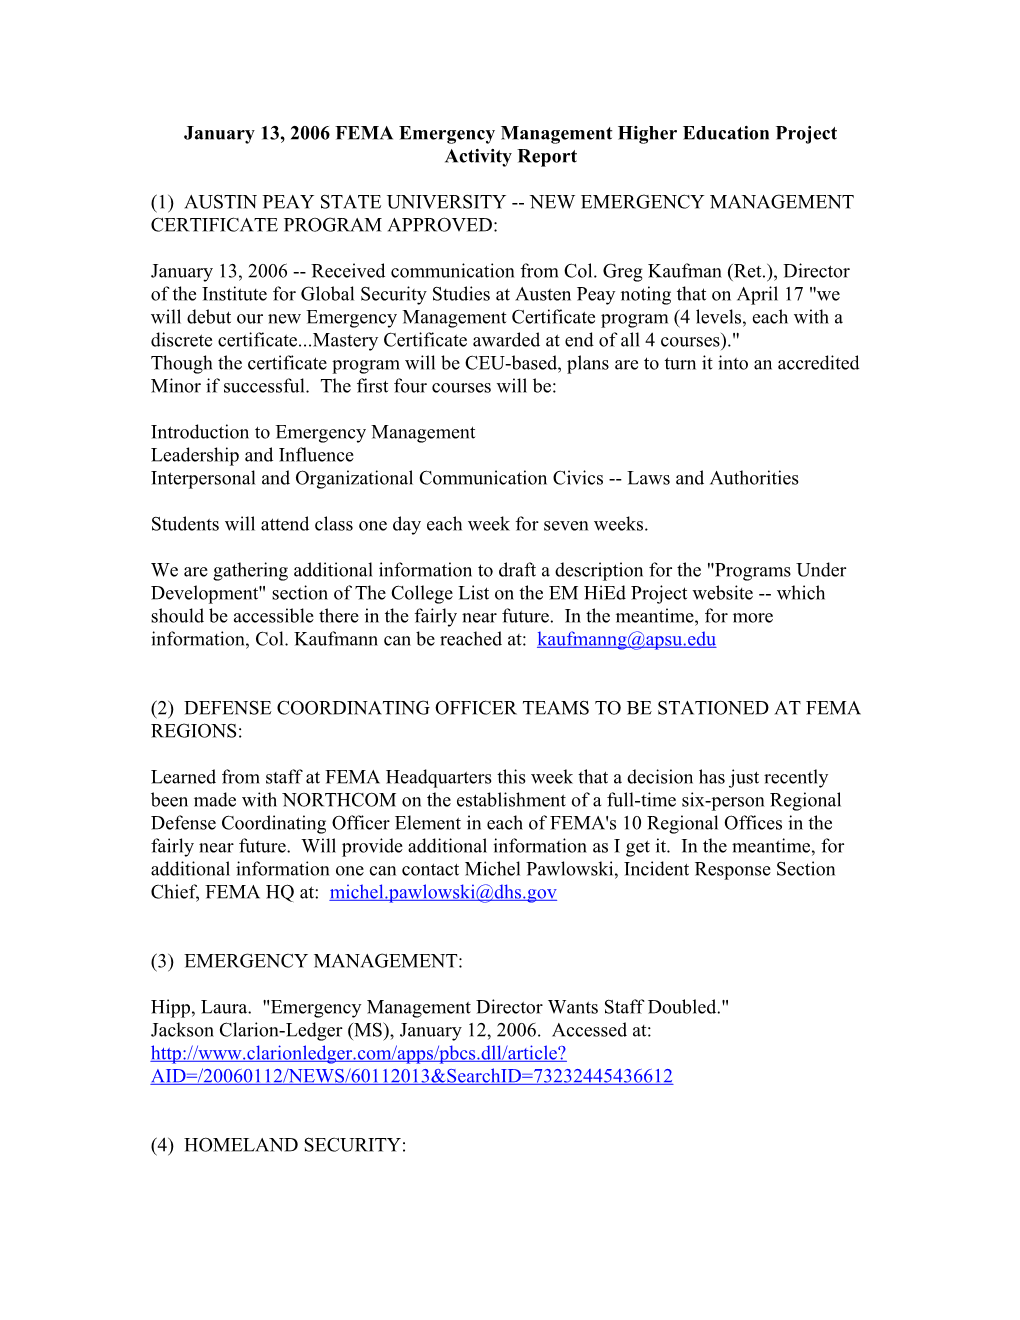 January 13, 2006 FEMA Emergency Management Higher Education Project Activity Report